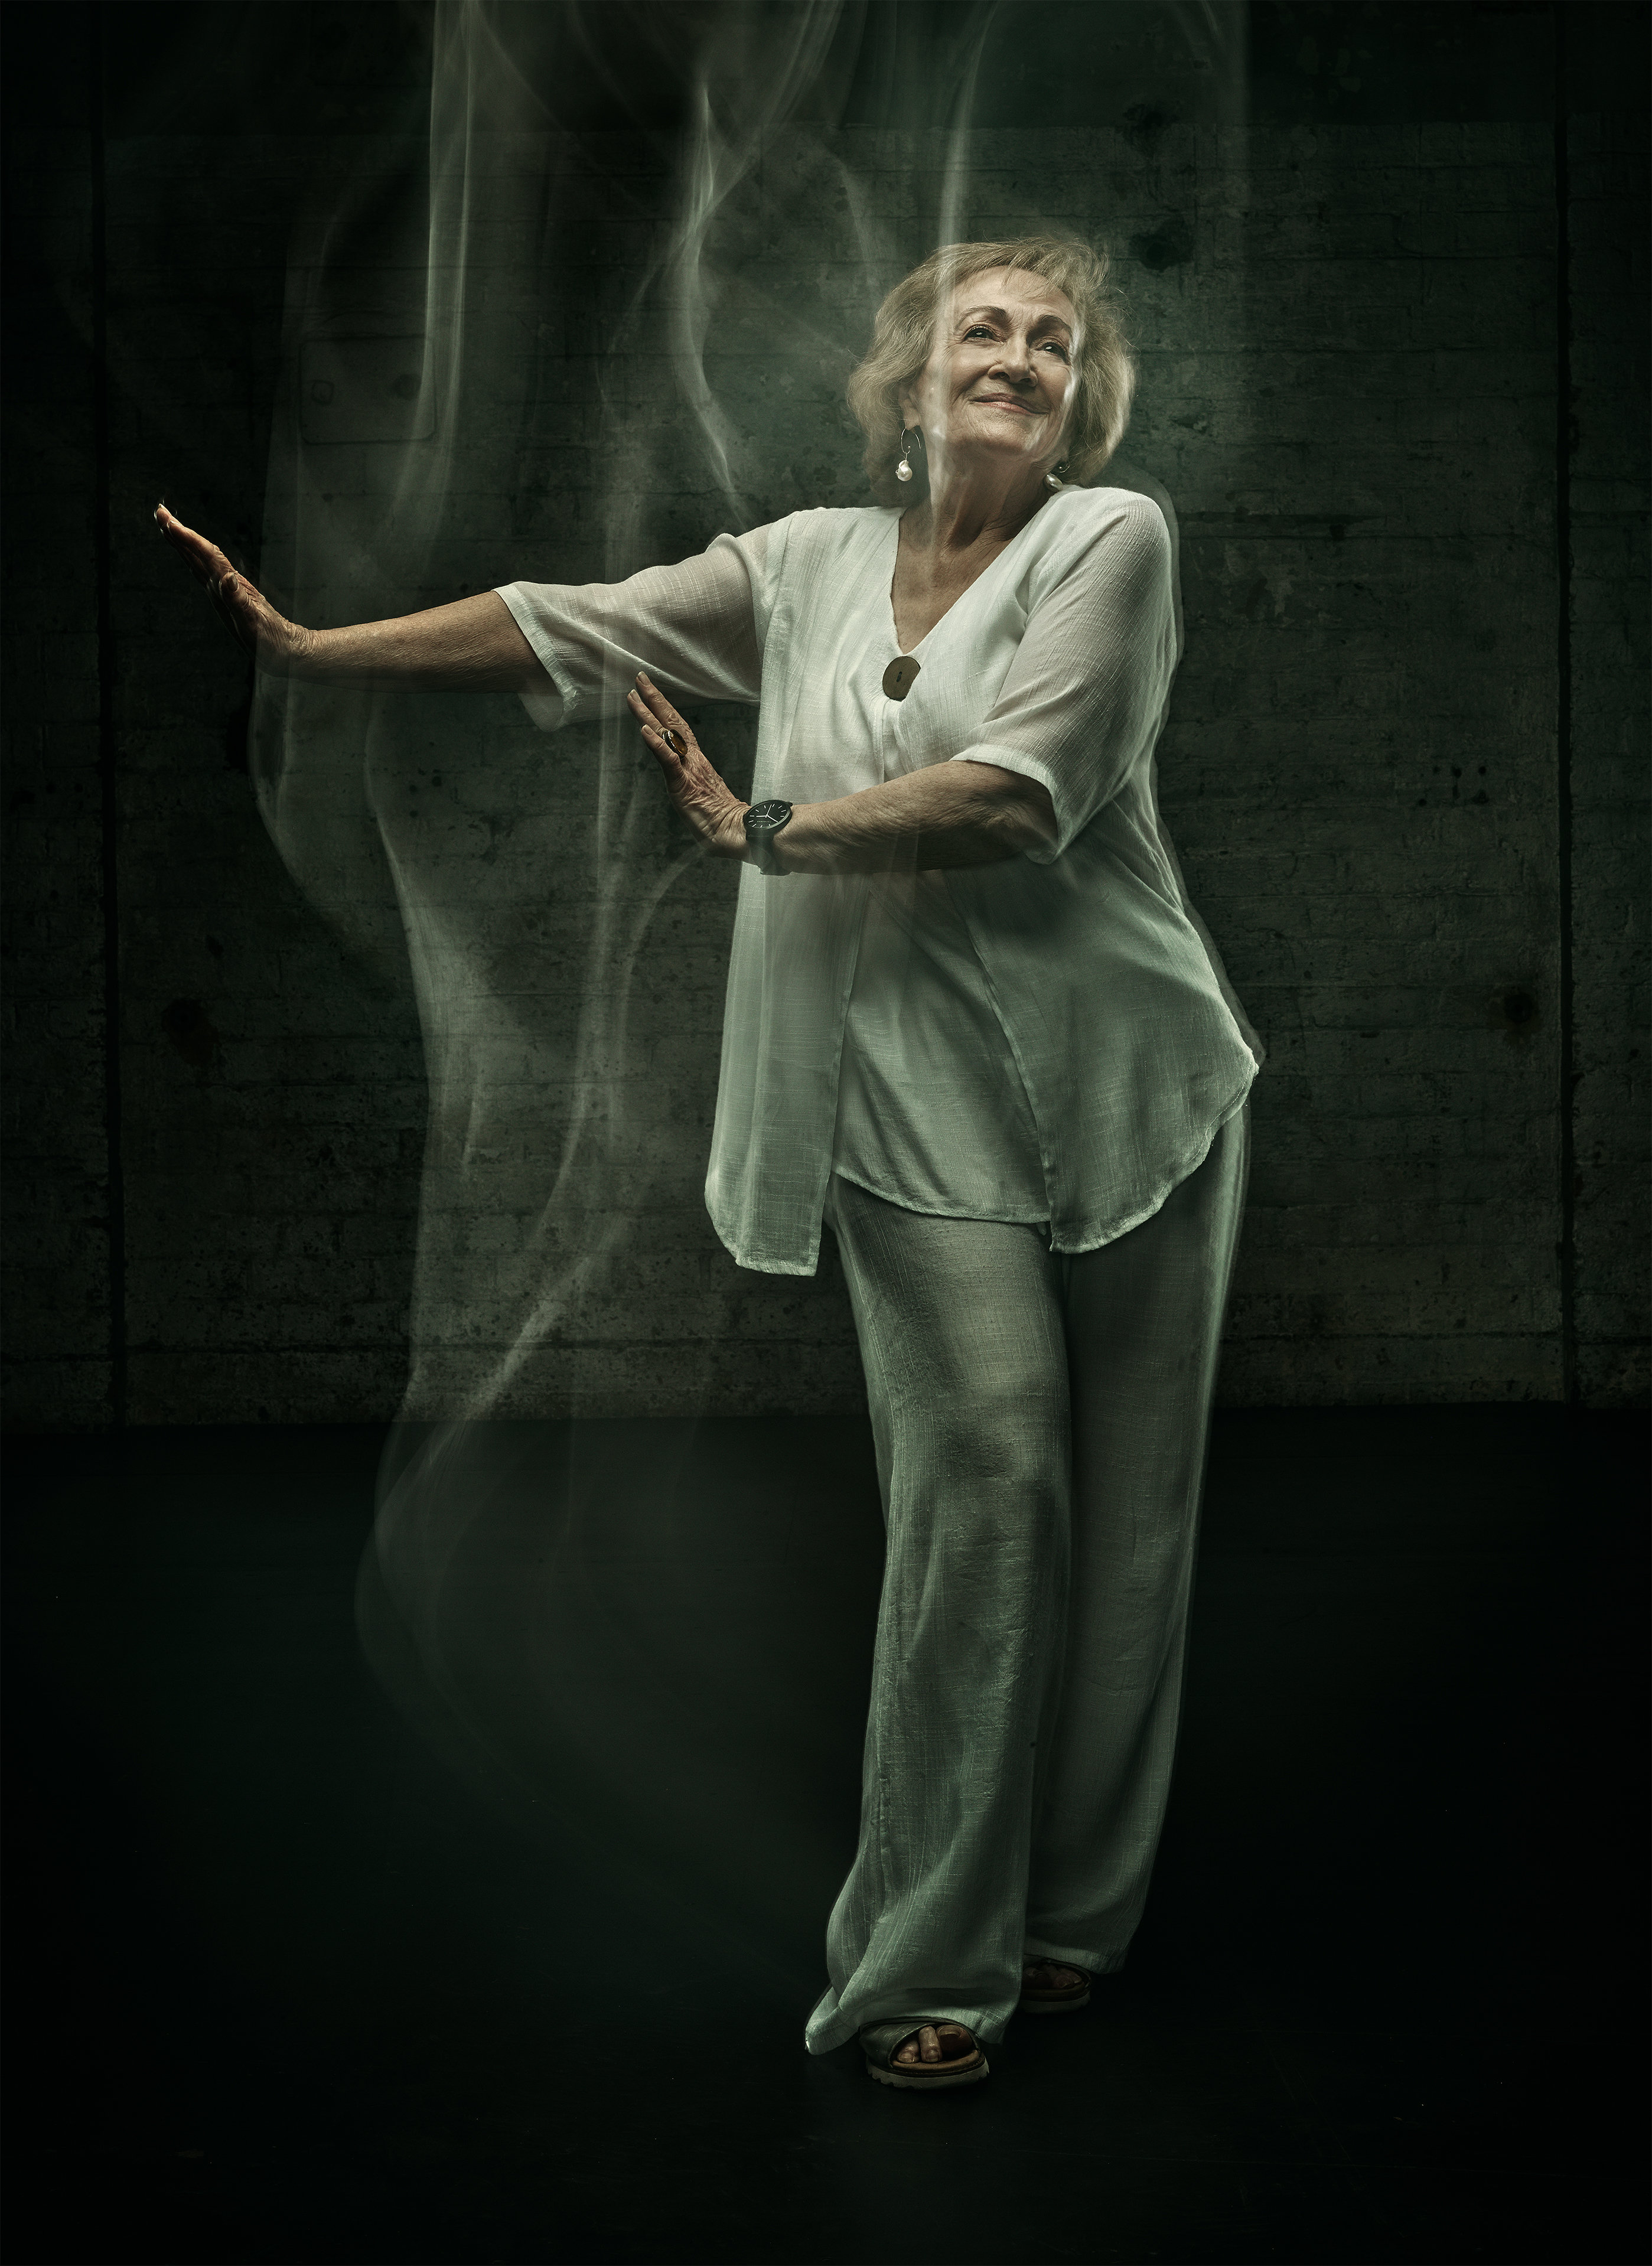 Older woman in white smiling and standing in a dance pose